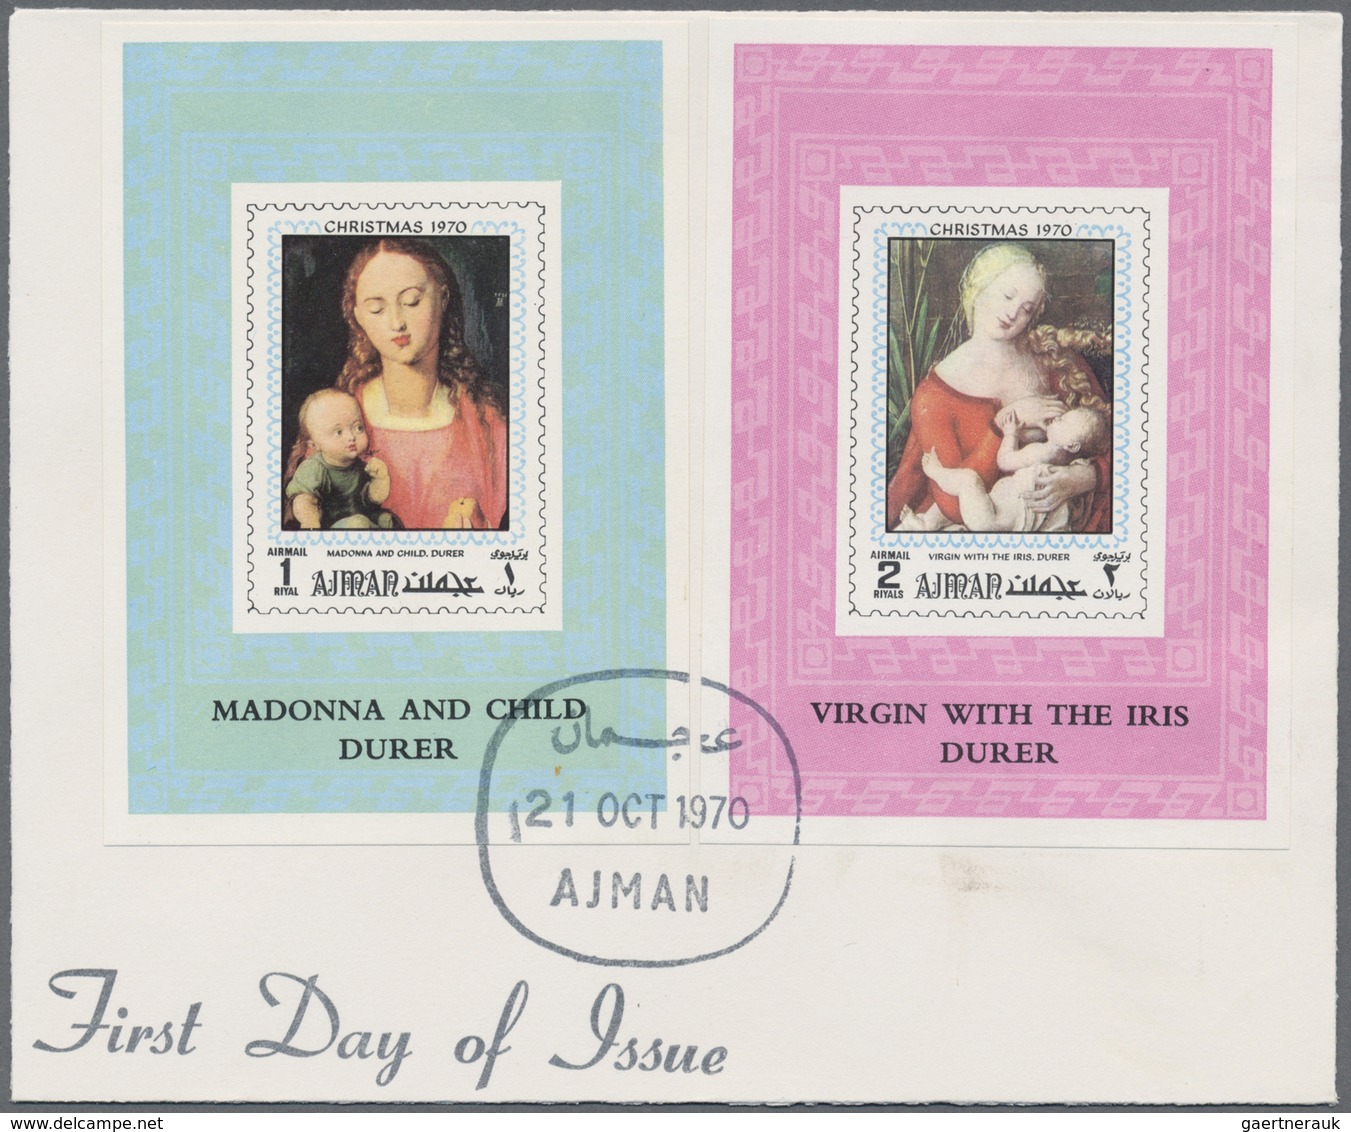 Adschman / Ajman: 1966/1971, Petty Collection Of 34 Different F.d.c. Incl. Imperforate Issues, Souve - Adschman